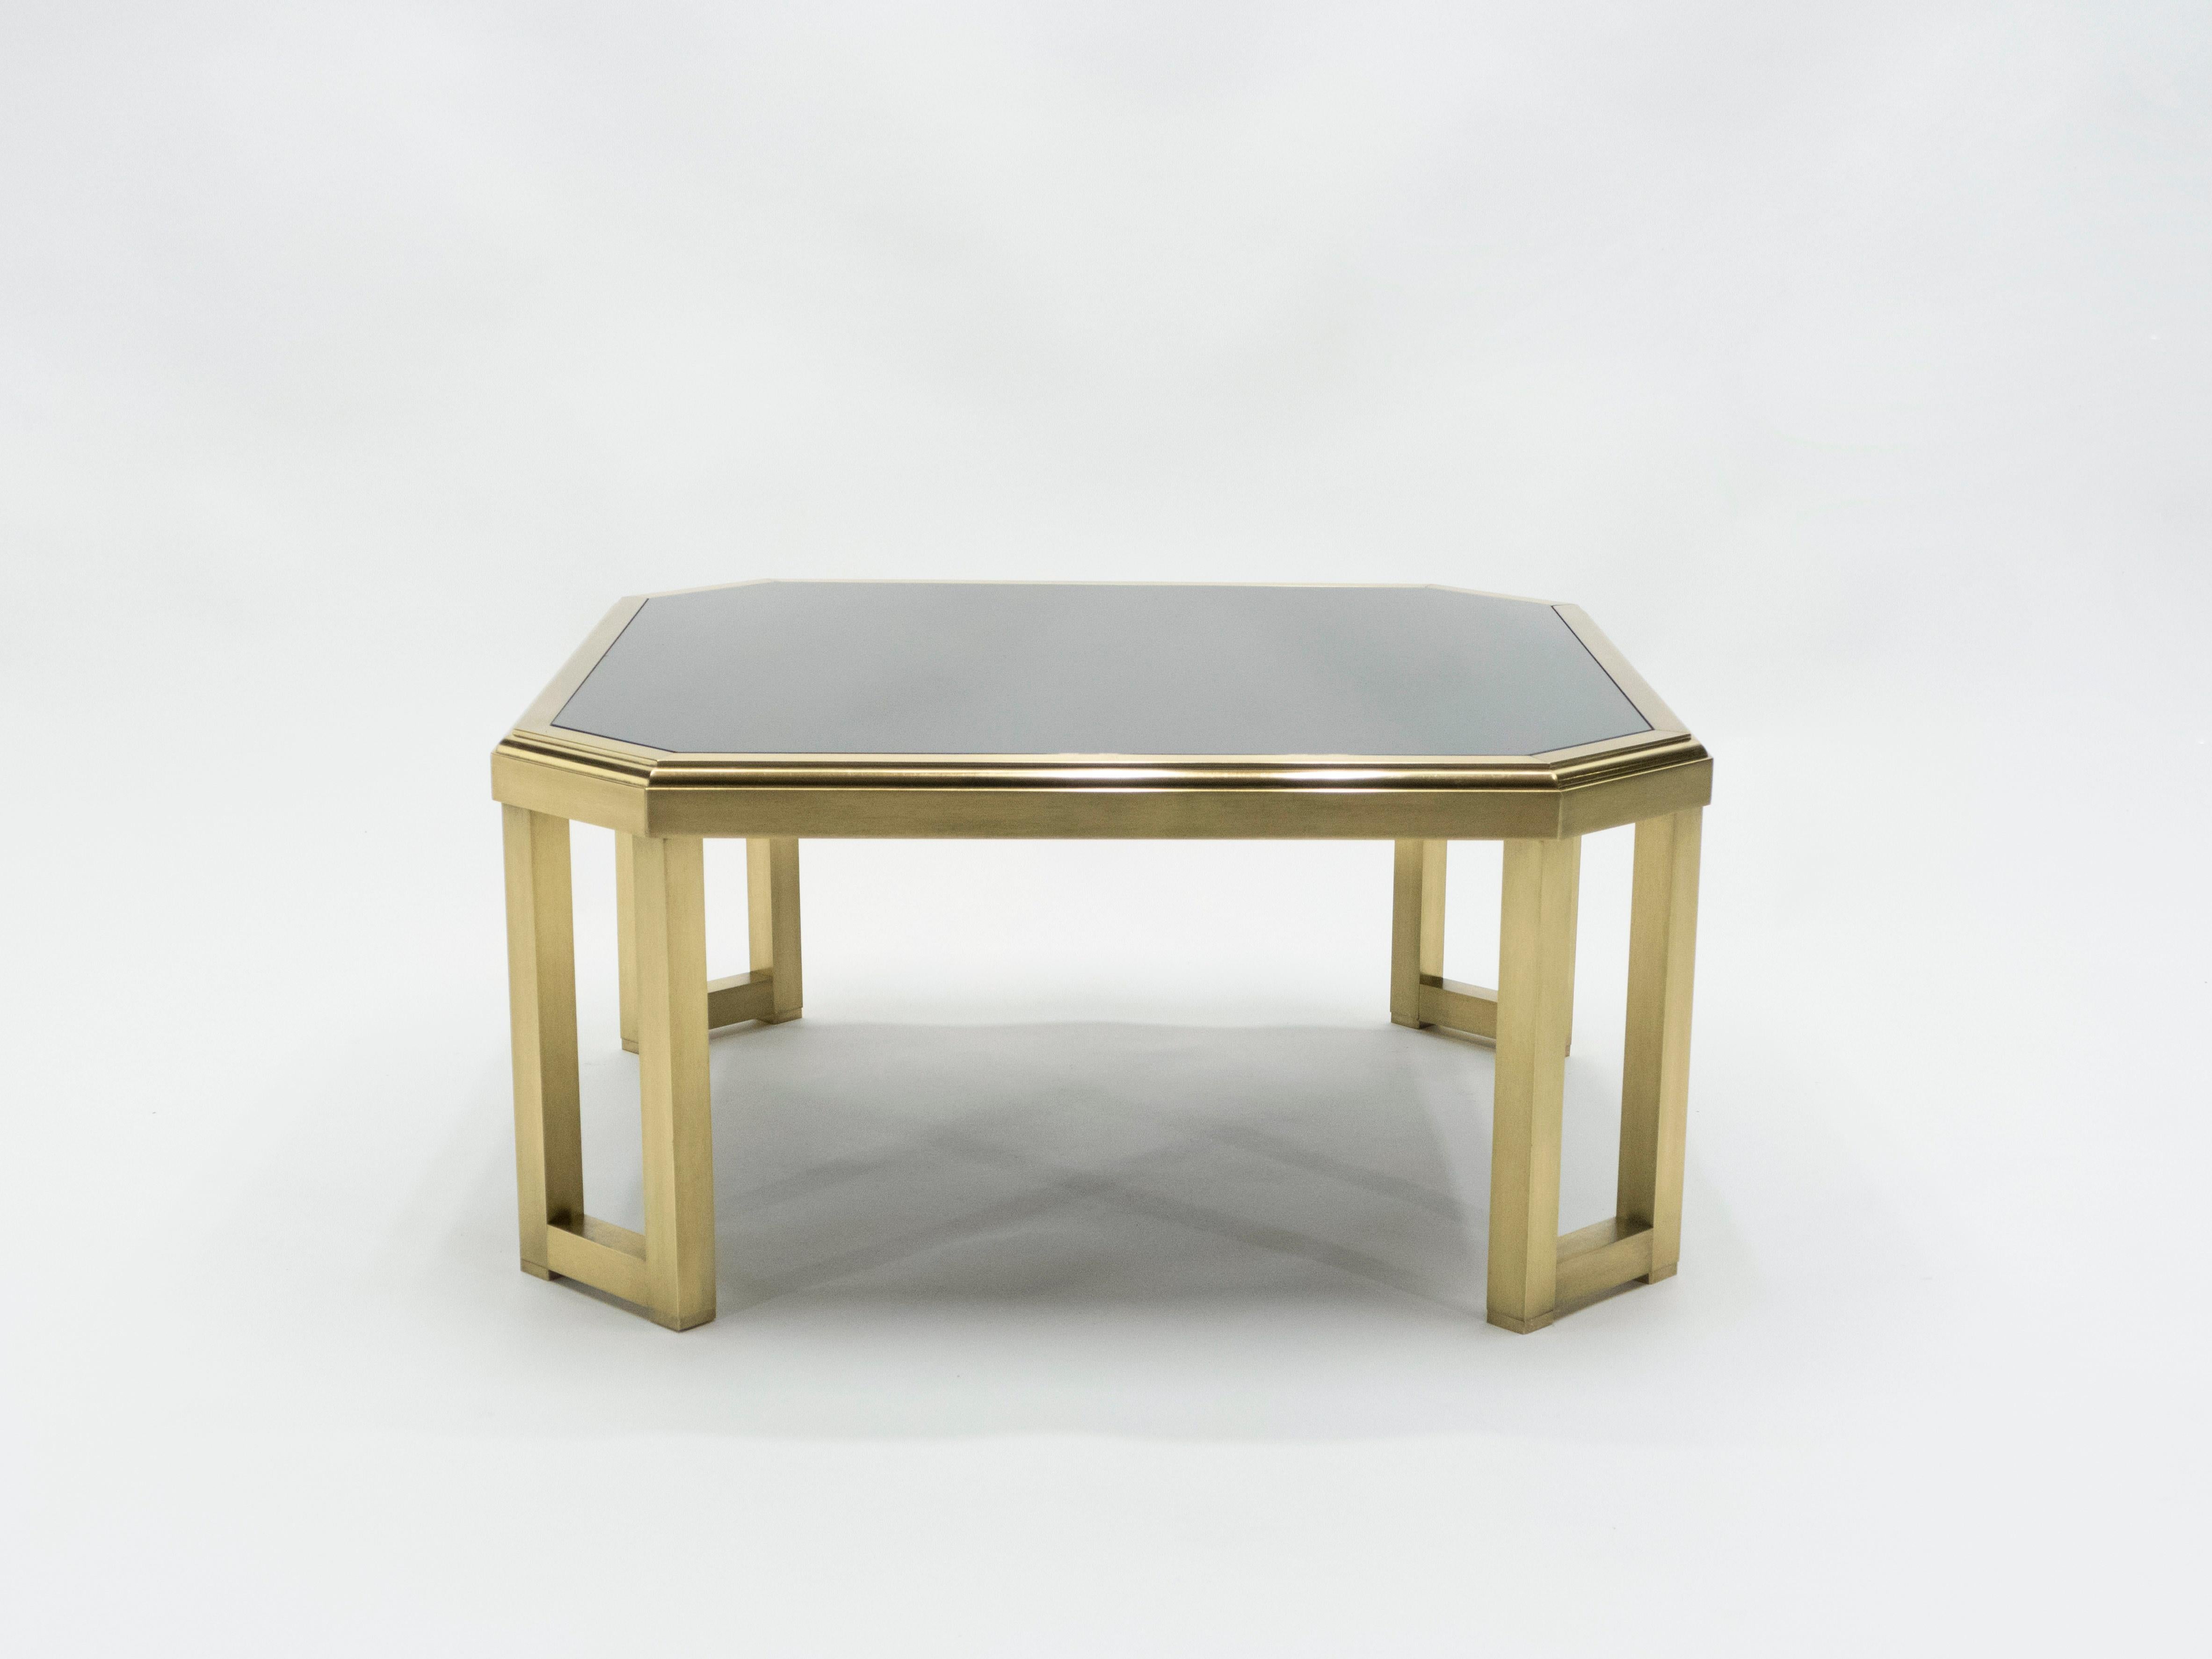 This table’s beautiful, polished brass base and feet reflect the Chinese-inspired design that dominated many creations by Maison Jansen. Mid-Century Modern elements like sleek, clean lines are given an ornamental flare, with a brand new black